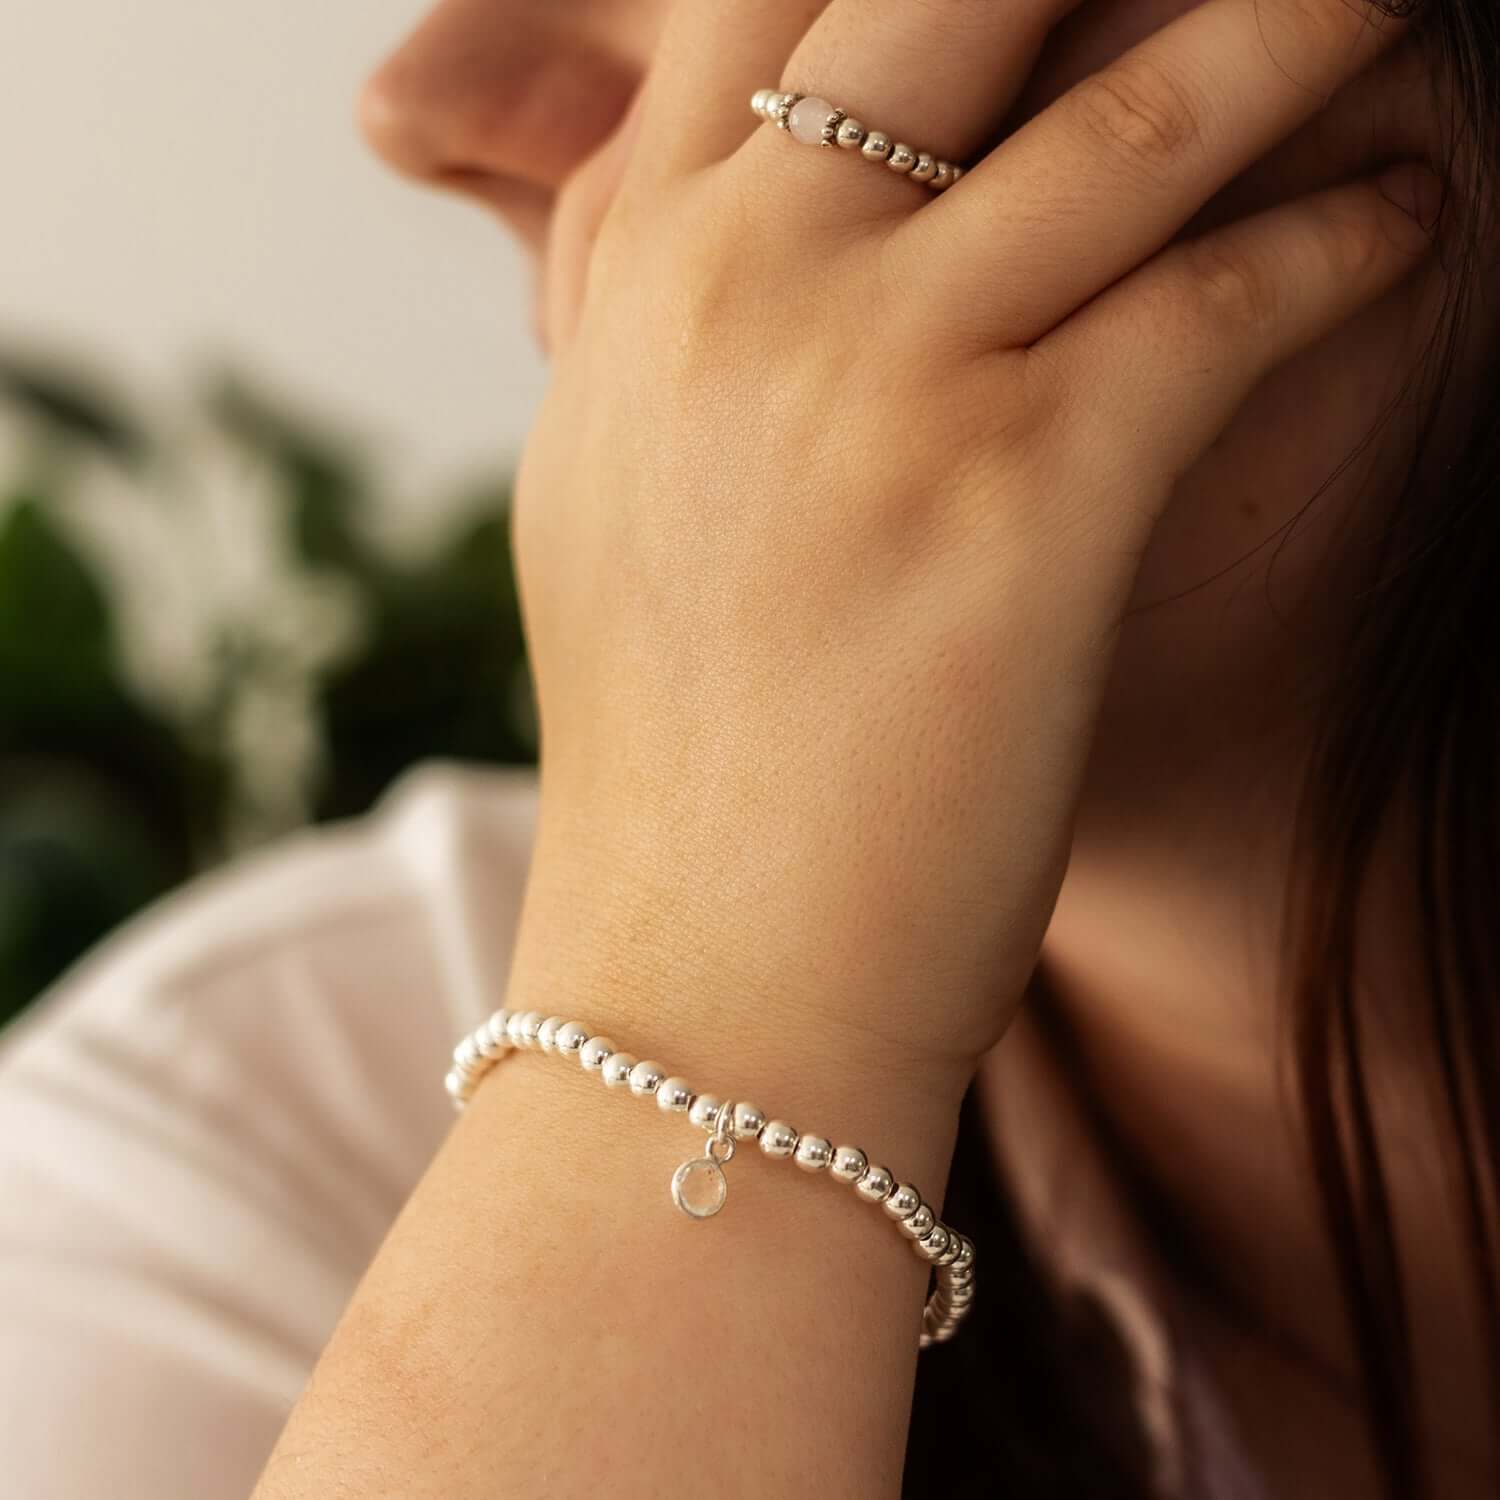 A close-up of a person resting their hand on their face. They are wearing a beaded silver ring and a matching beaded silver bracelet with a small charm, reminiscent of April birthstone jewellery from the UK. The background is blurred with green foliage